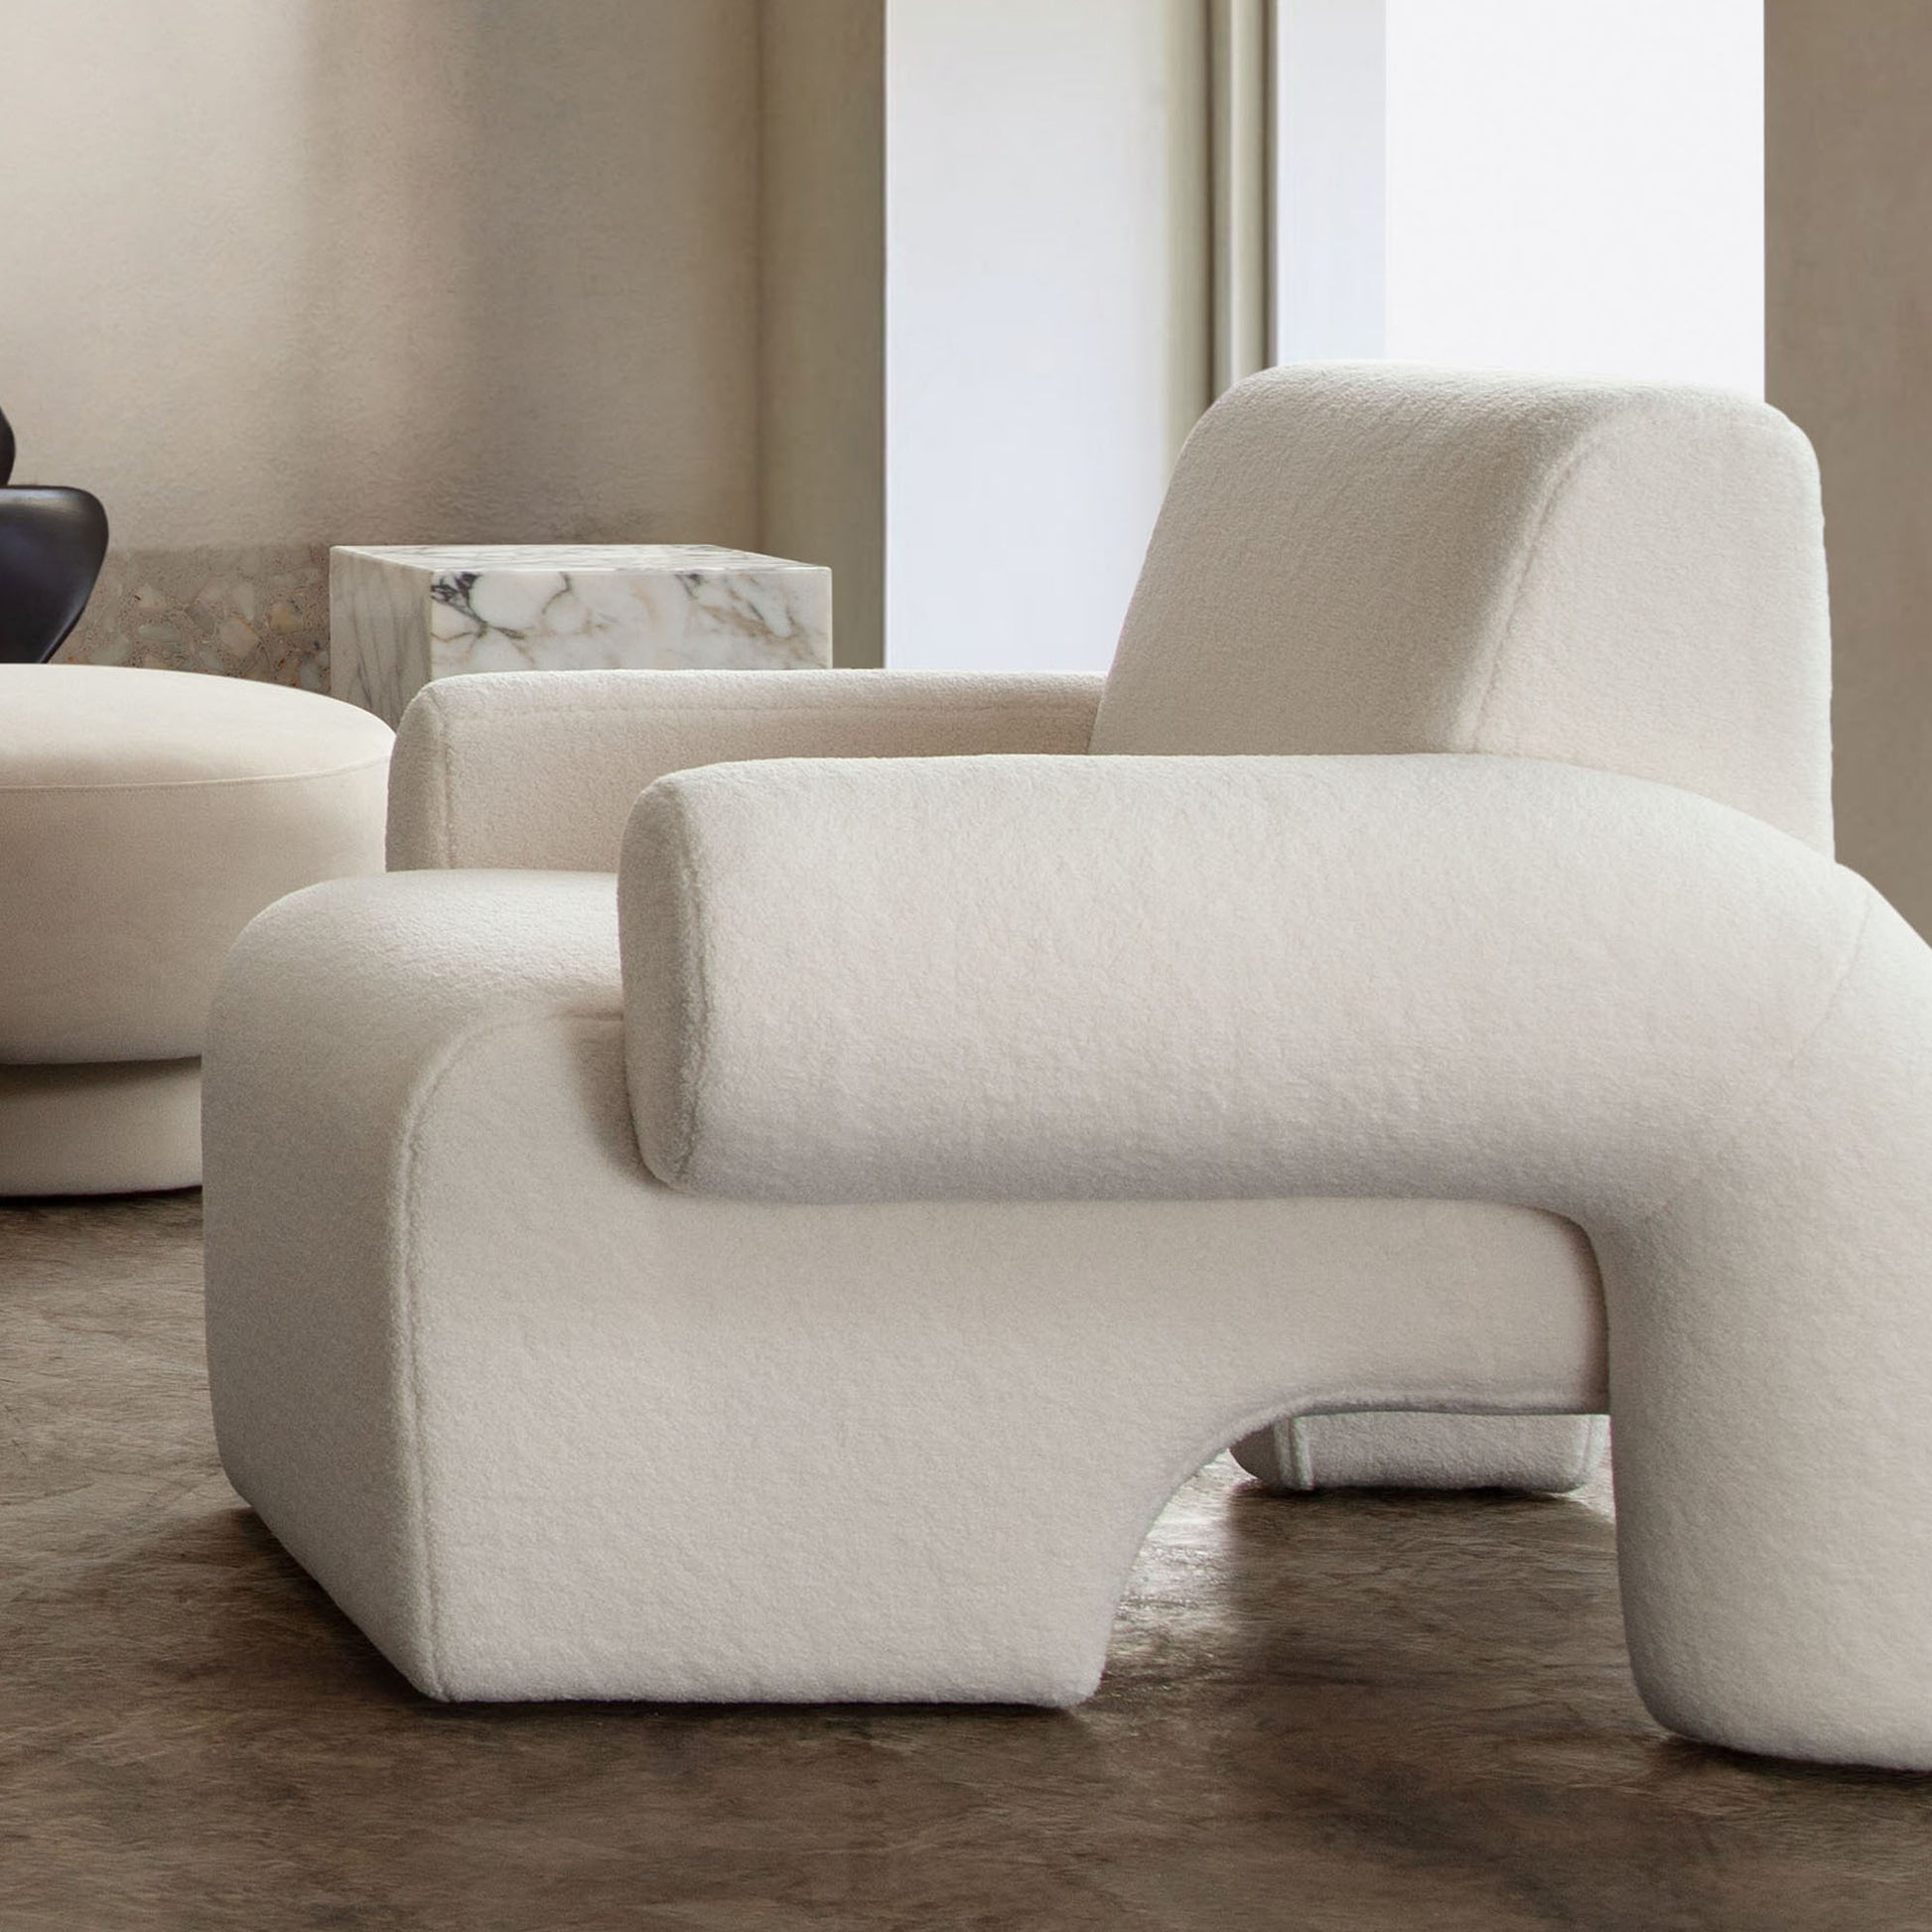 Noa Accent Chair in Ivory Sherpa Fabric - Elite Maison